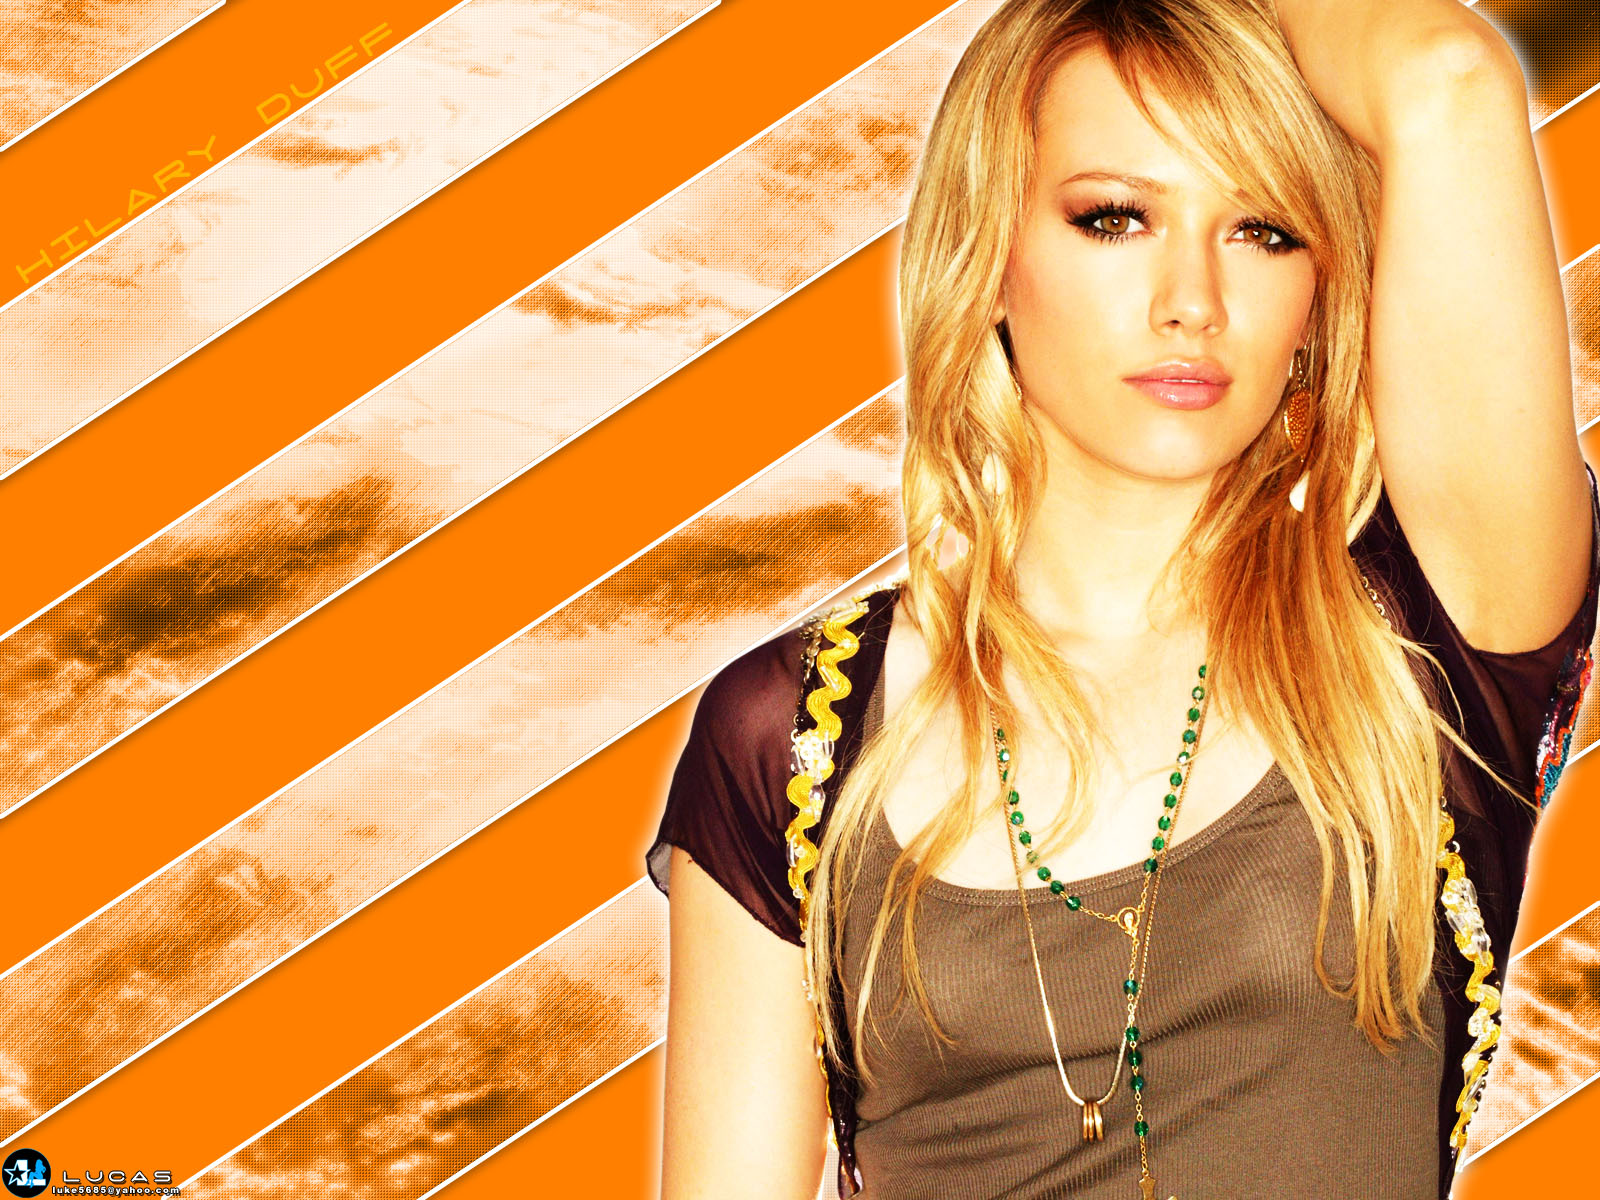 Celebrity wallpapers / Hilary duff wallpapers / Hilary duff wallpapers (9432 